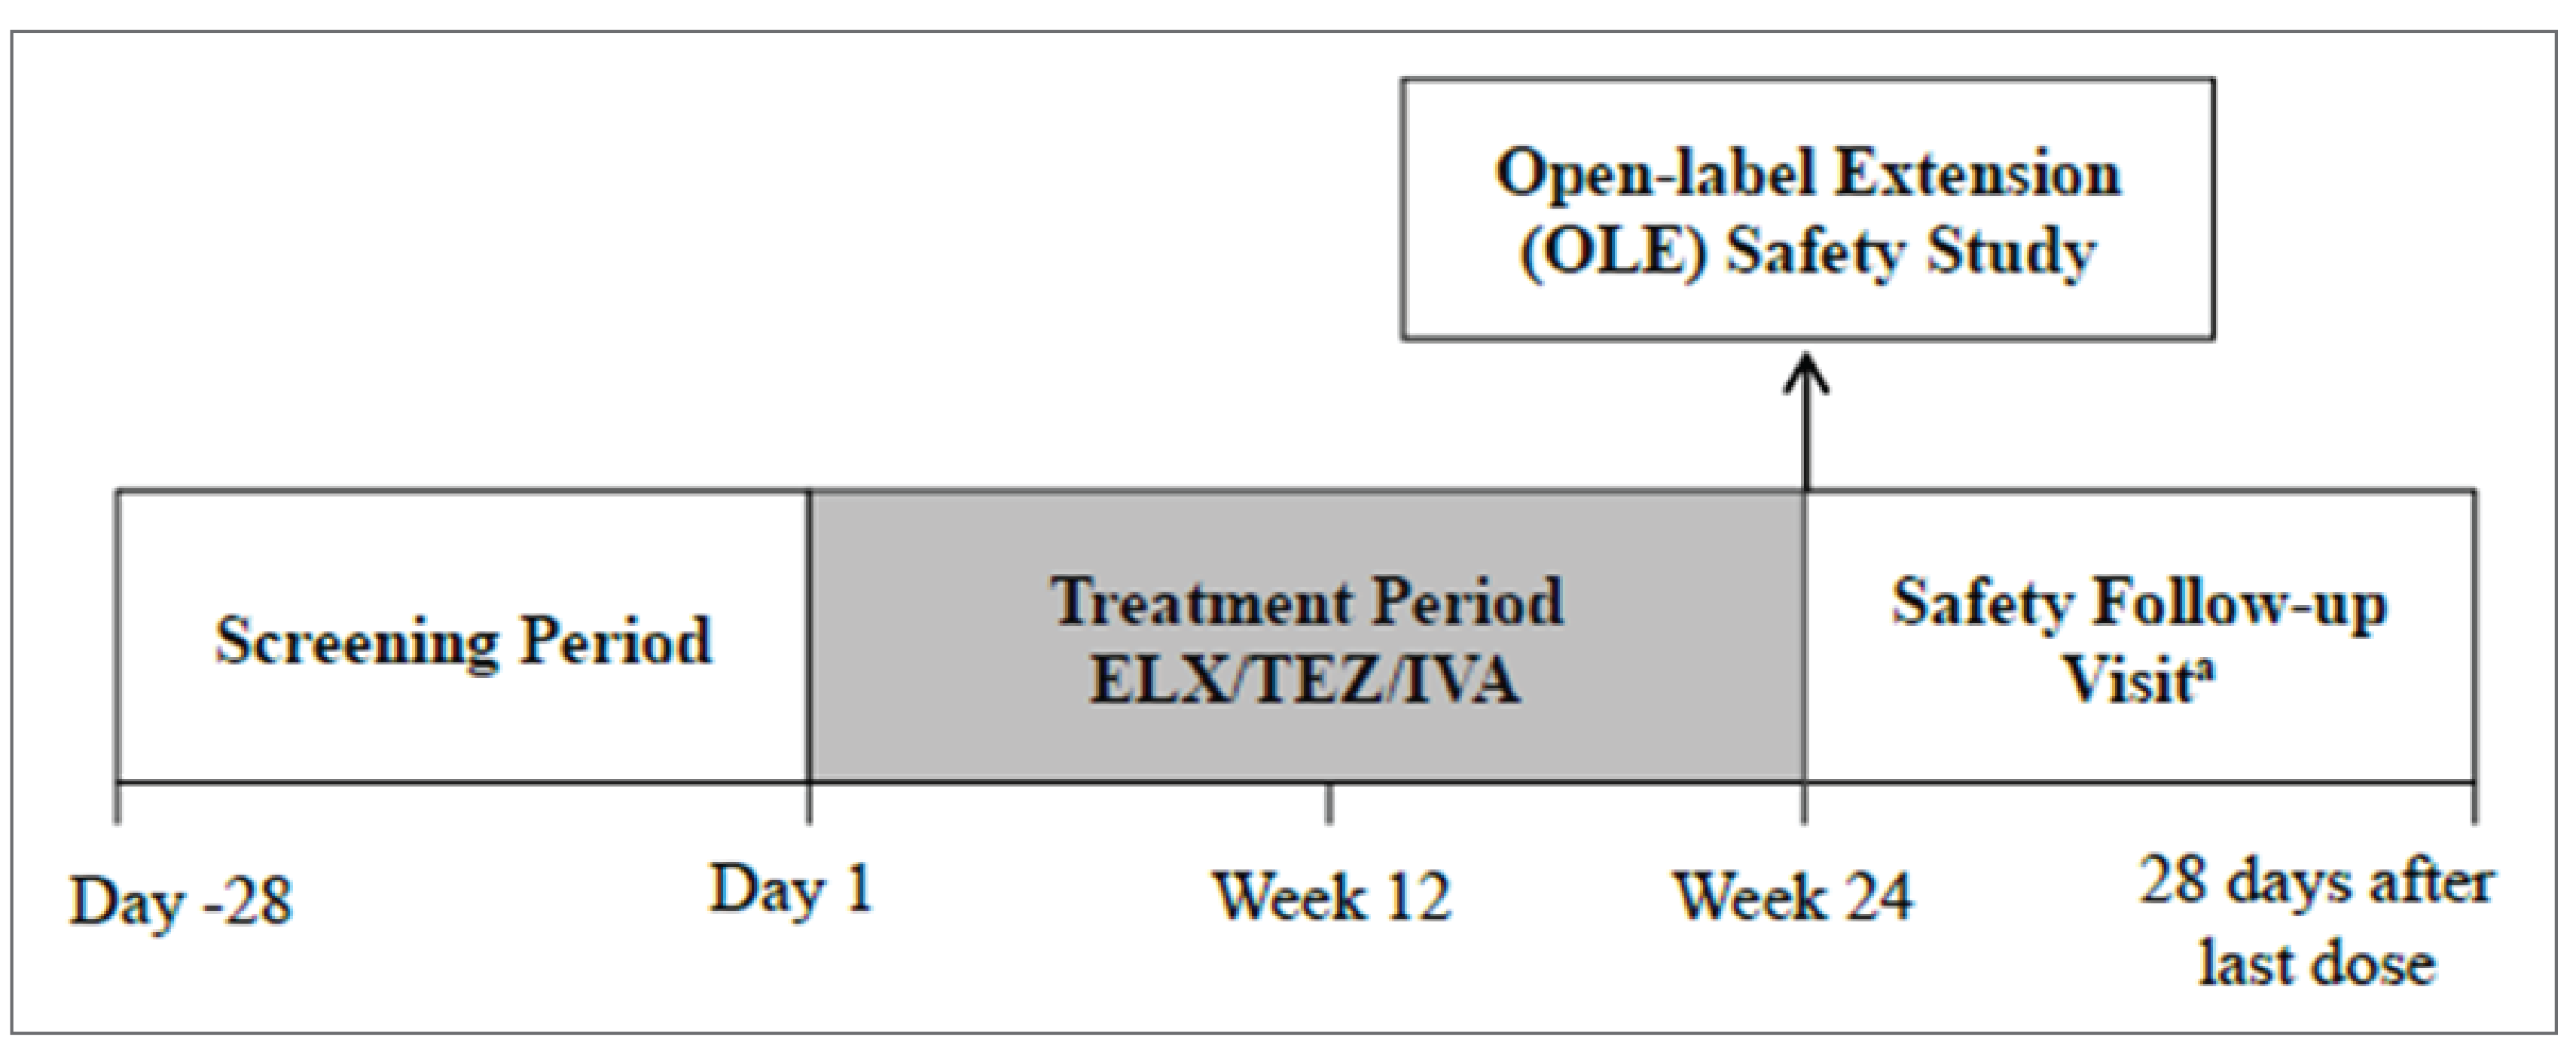 Figure shows the design of Part B of Study 111, including the screening period, treatment period, and safety follow-up visit. Patients could enter an open-label extension phase at week 24.